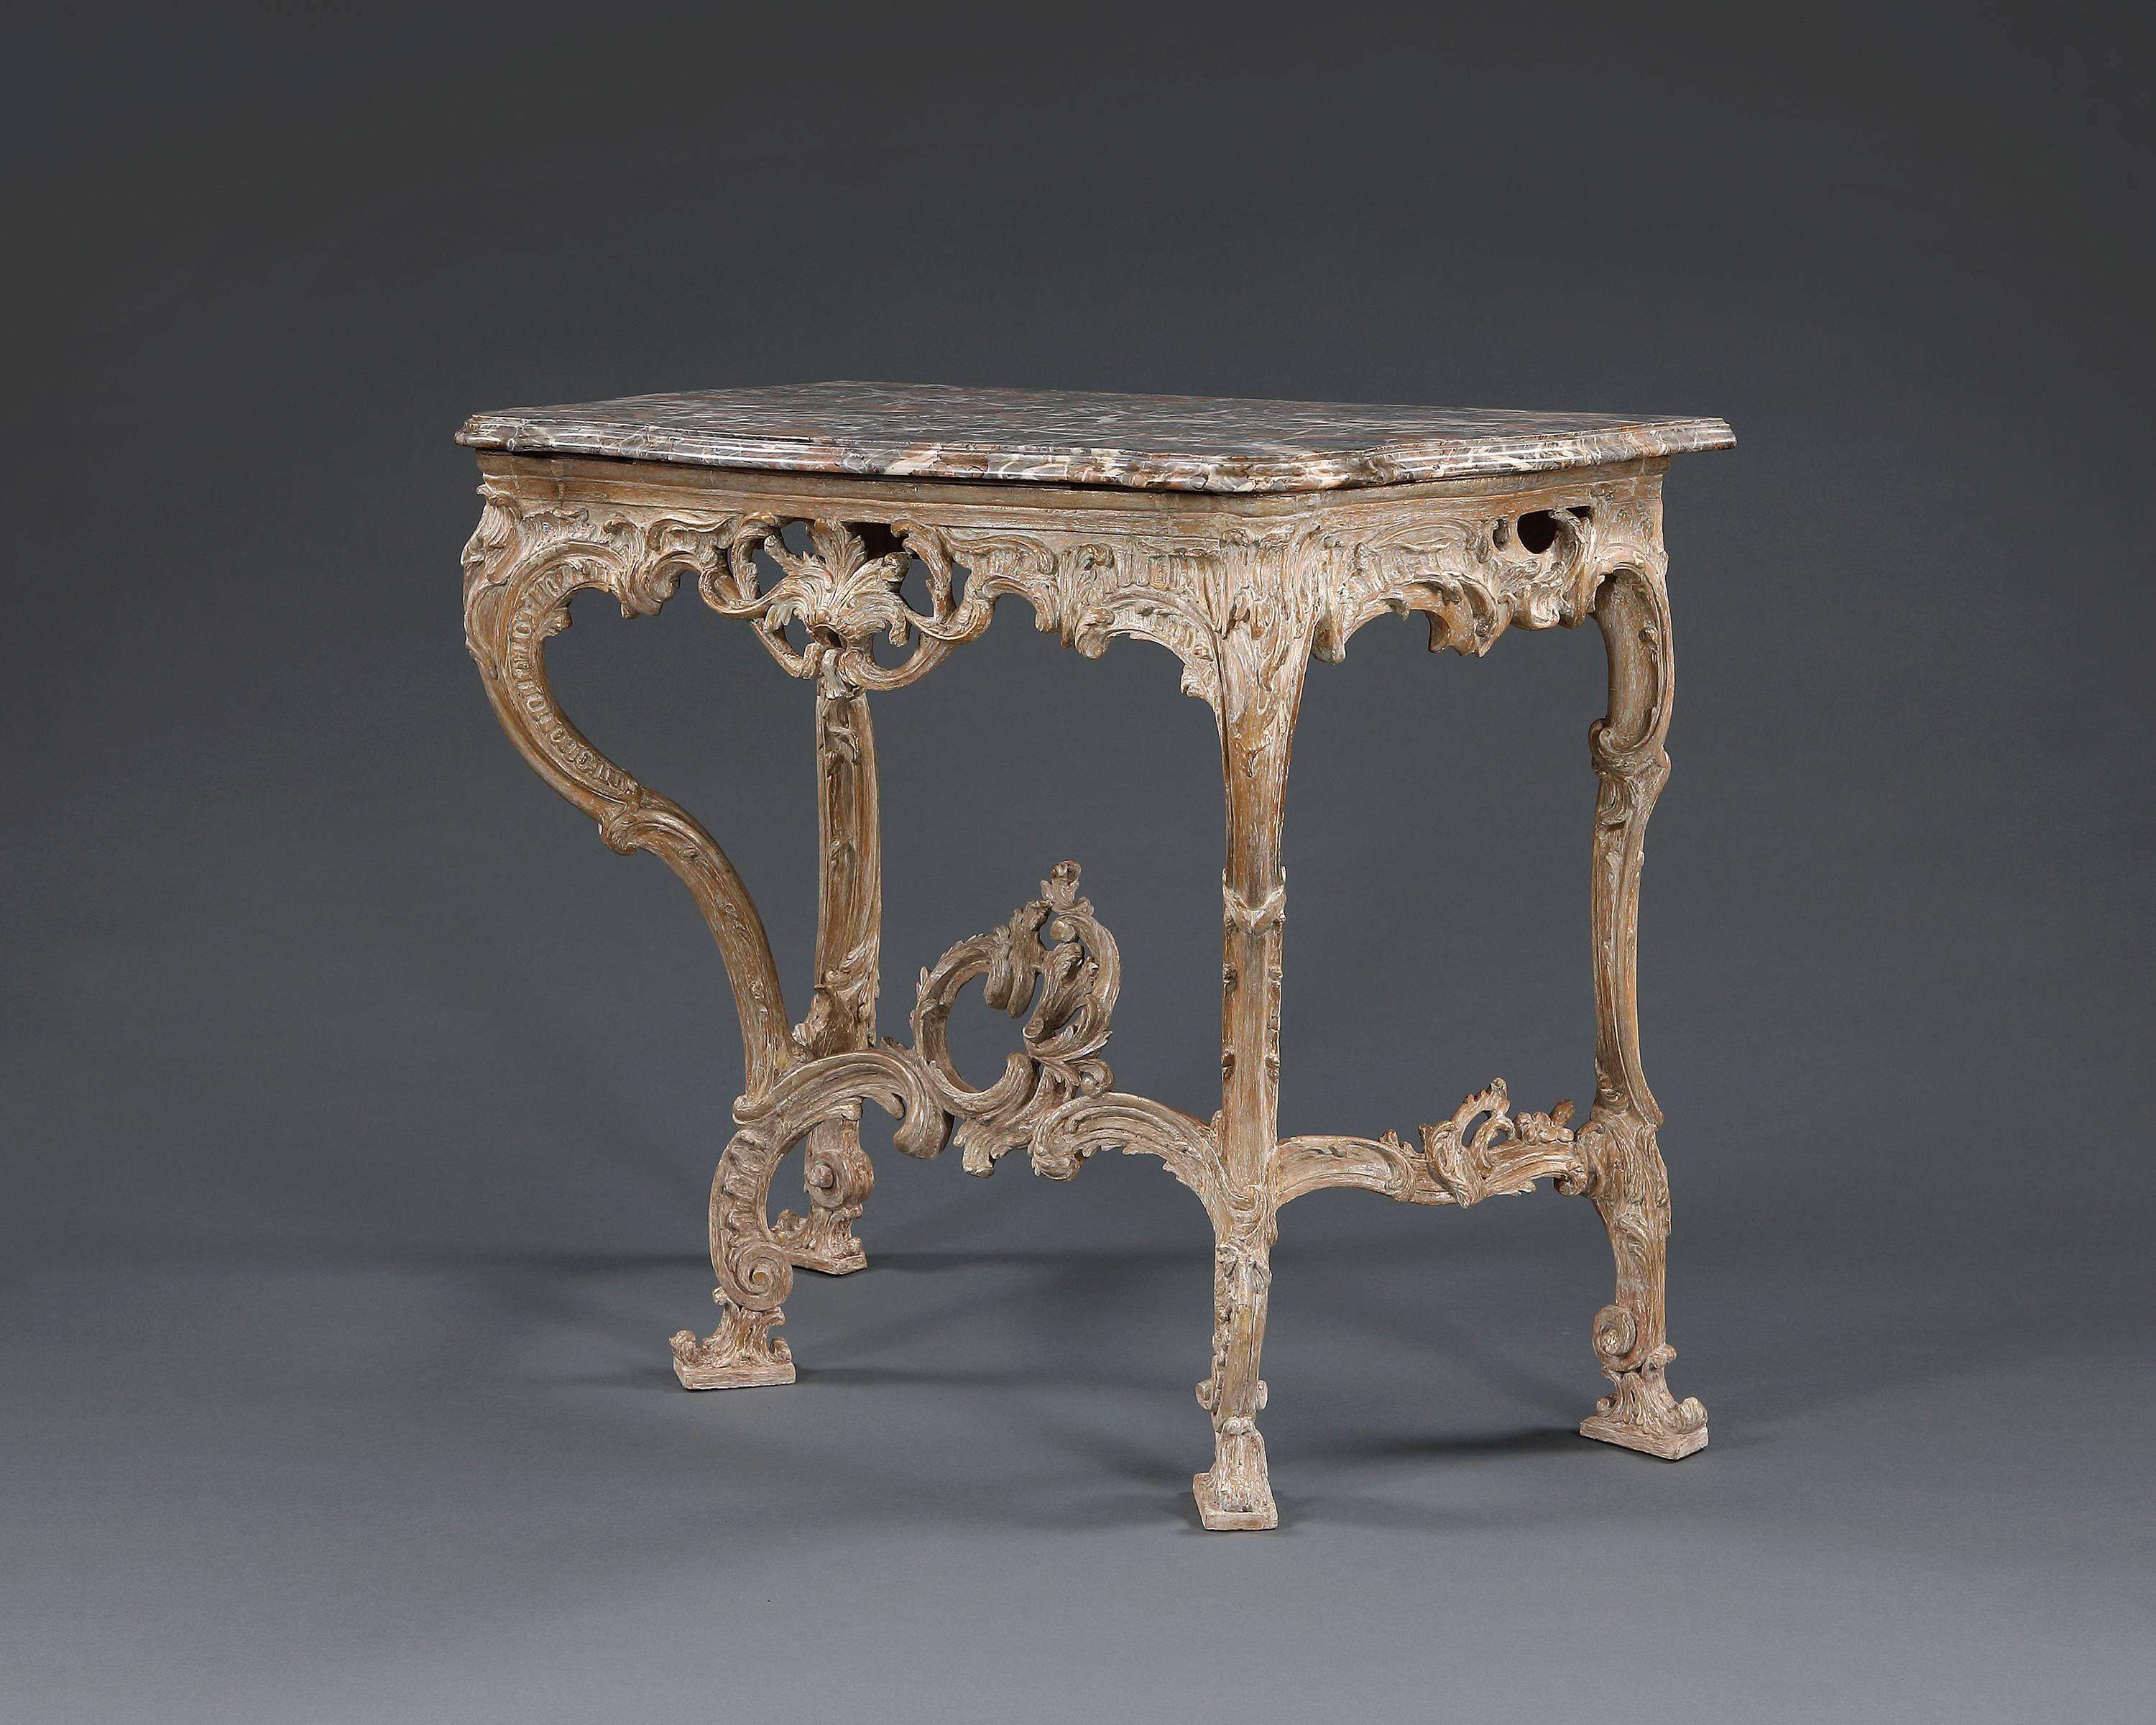 A fine quality serpentine fronted marble top giltwood console table, in the Rococo manner. English, circa 1760.